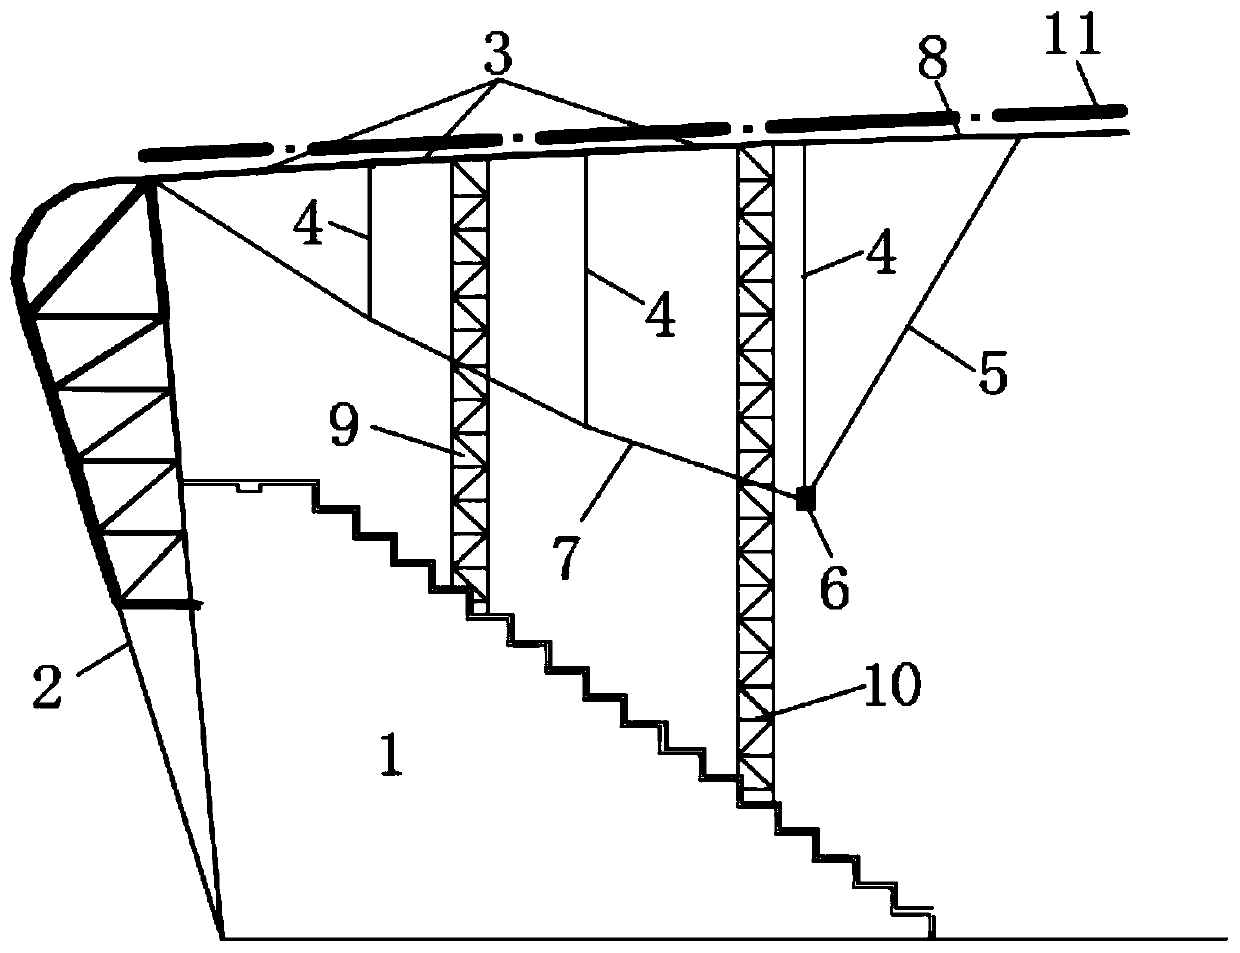 Construction method of annular cable-supported grid structure with upper grid participating in balancing inhaul cable pretension